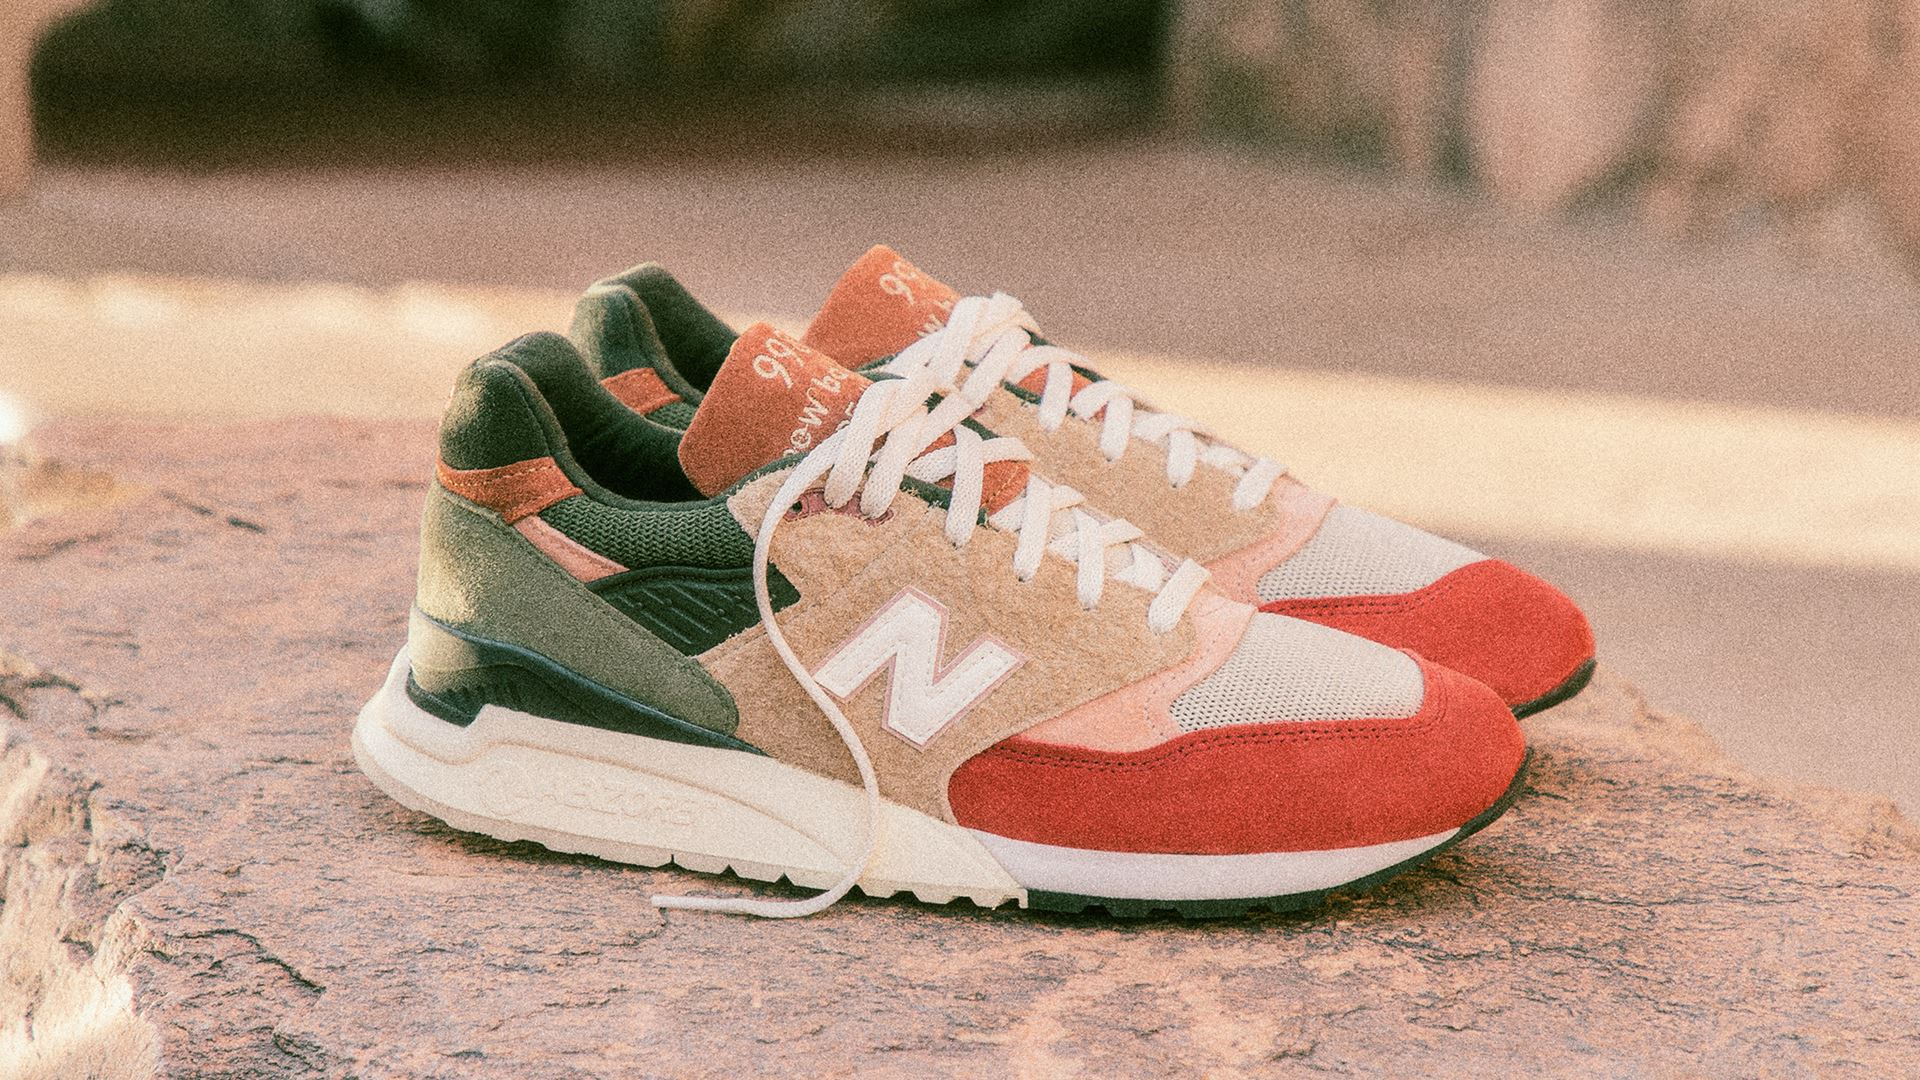 Spring is right around the corner and New Balance is well prepared